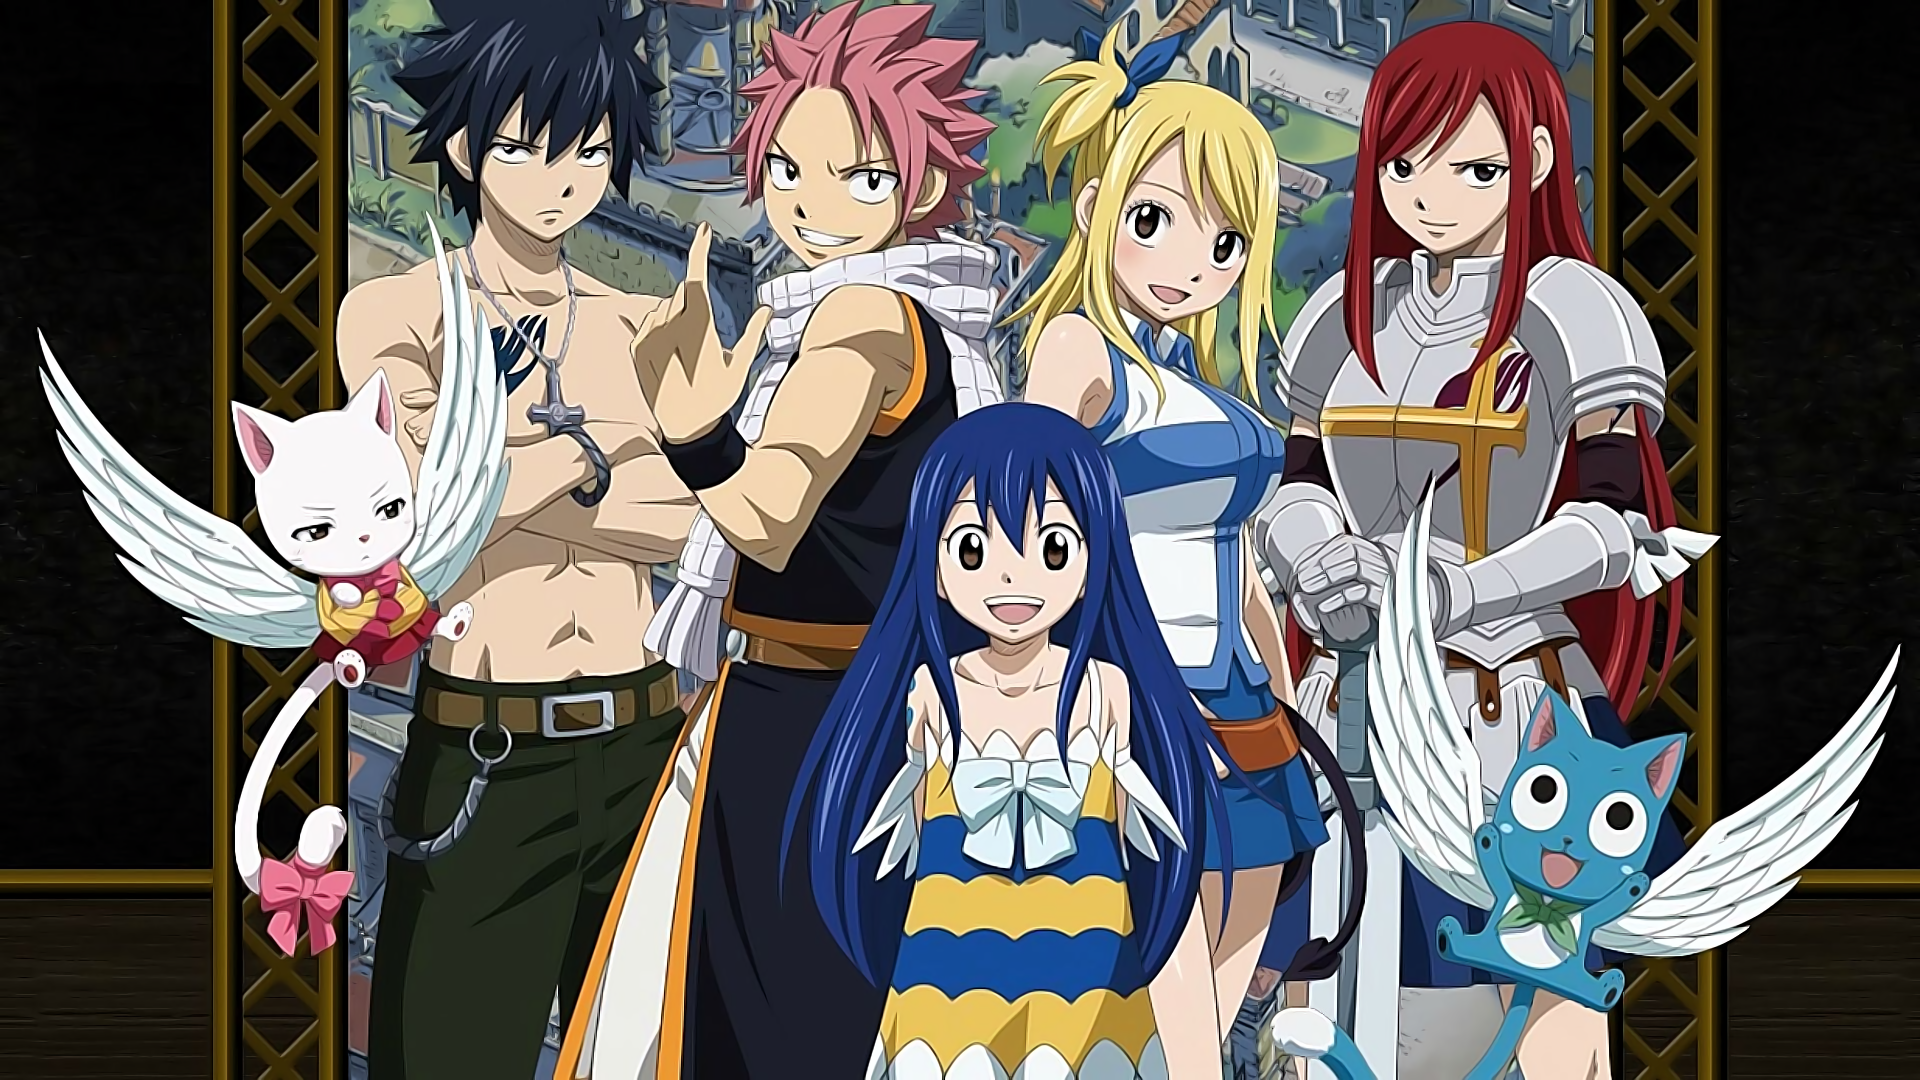 Charles Fairy Tail Erza Scarlet Gray Fullbuster Happy Fairy Tail Lucy Heartfilia Natsu Dragneel Wend 1920x1080